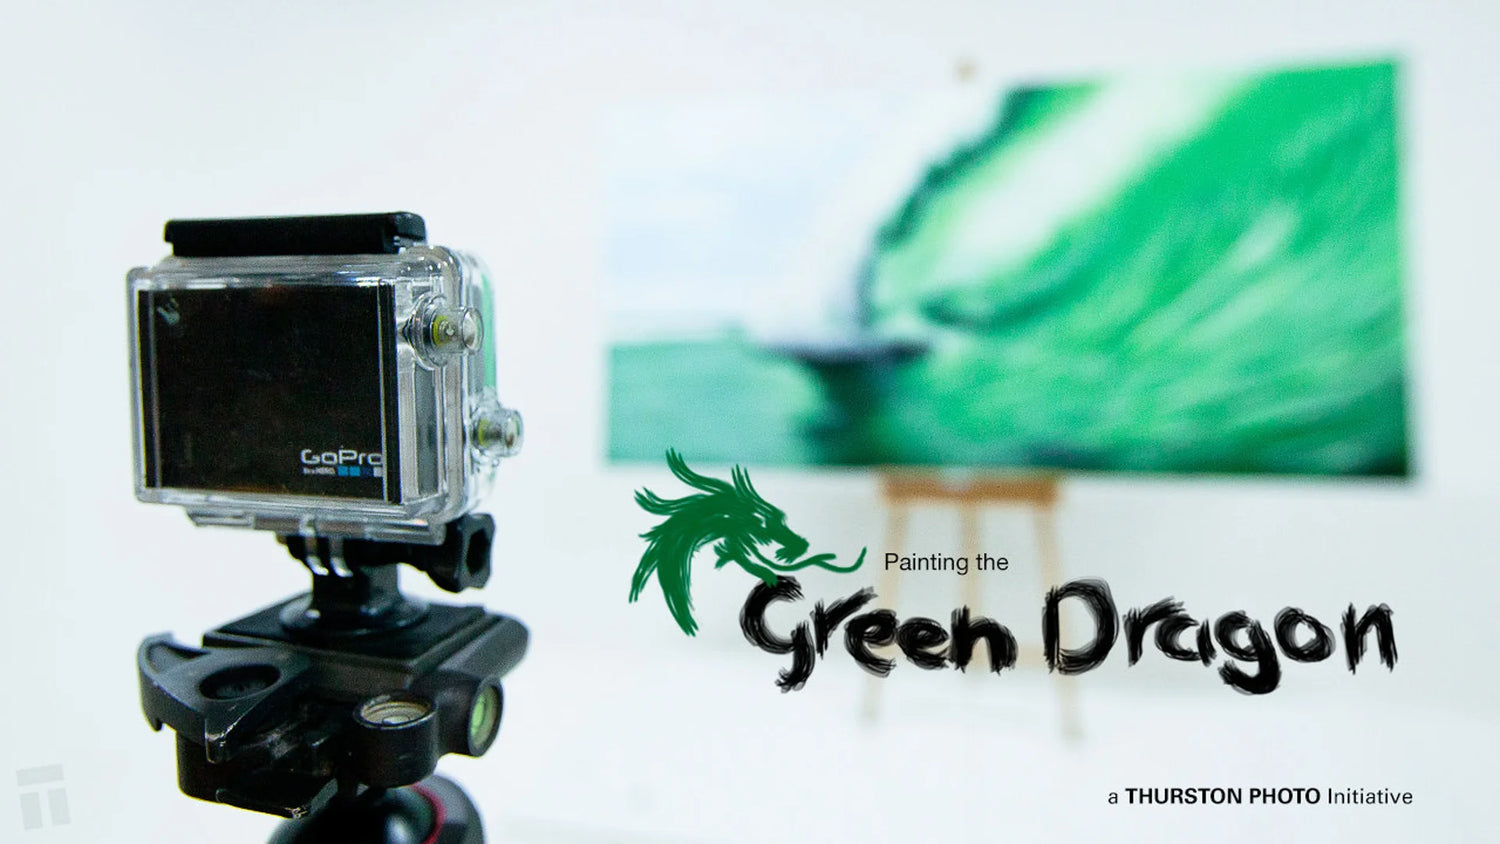 Painting the Green Dragon